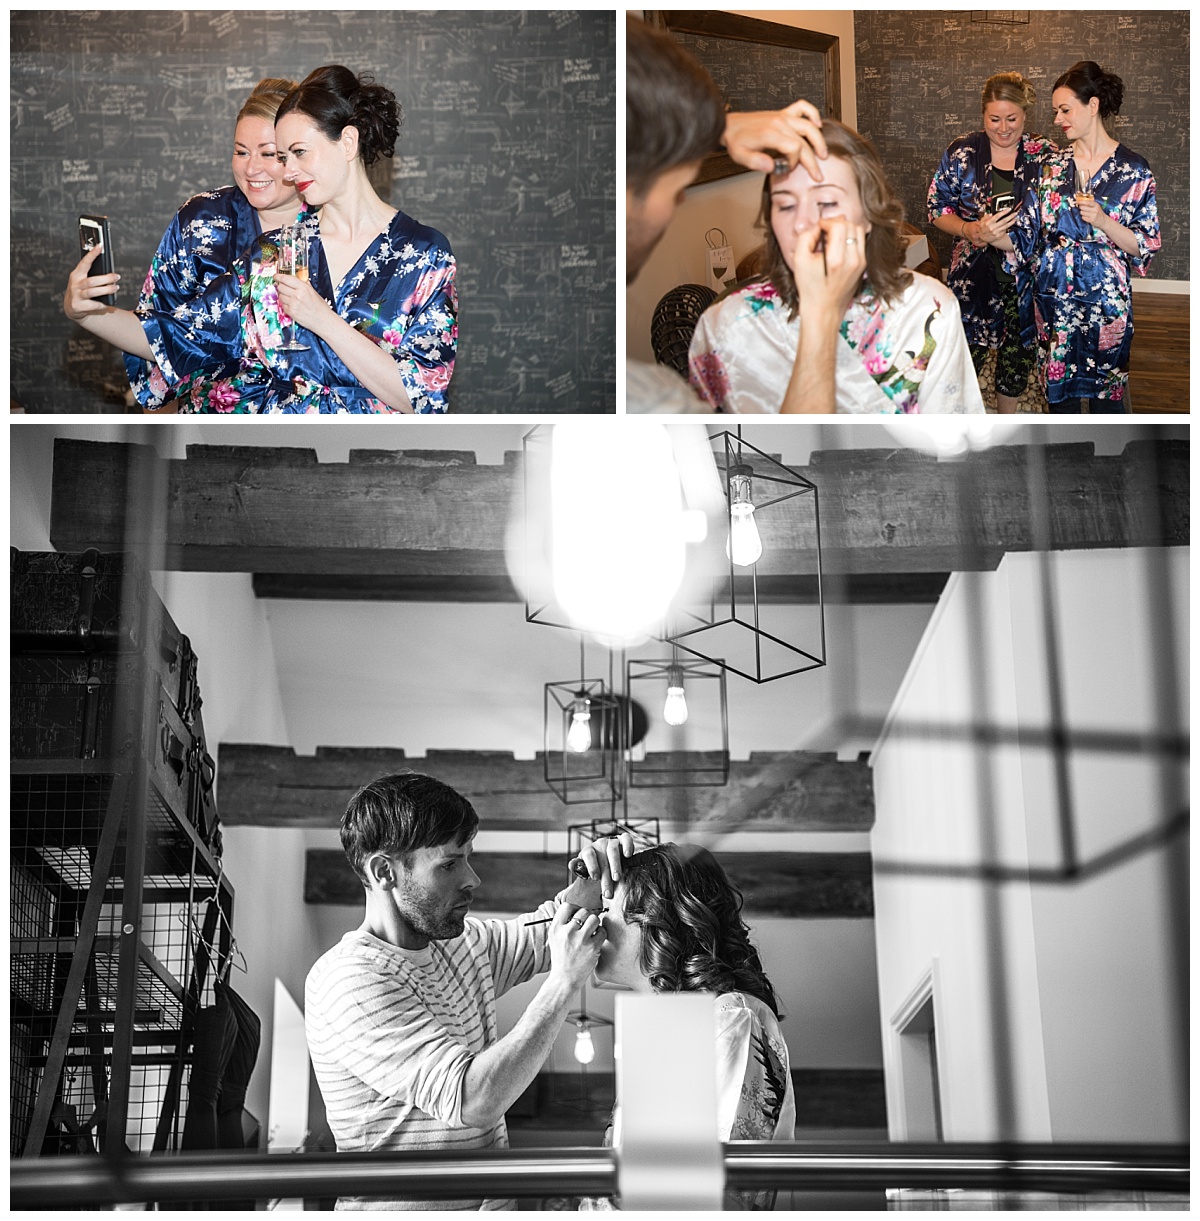 Wedding Photography Manchester - Clair and Peter's Bashal Barn Wedding Day 10